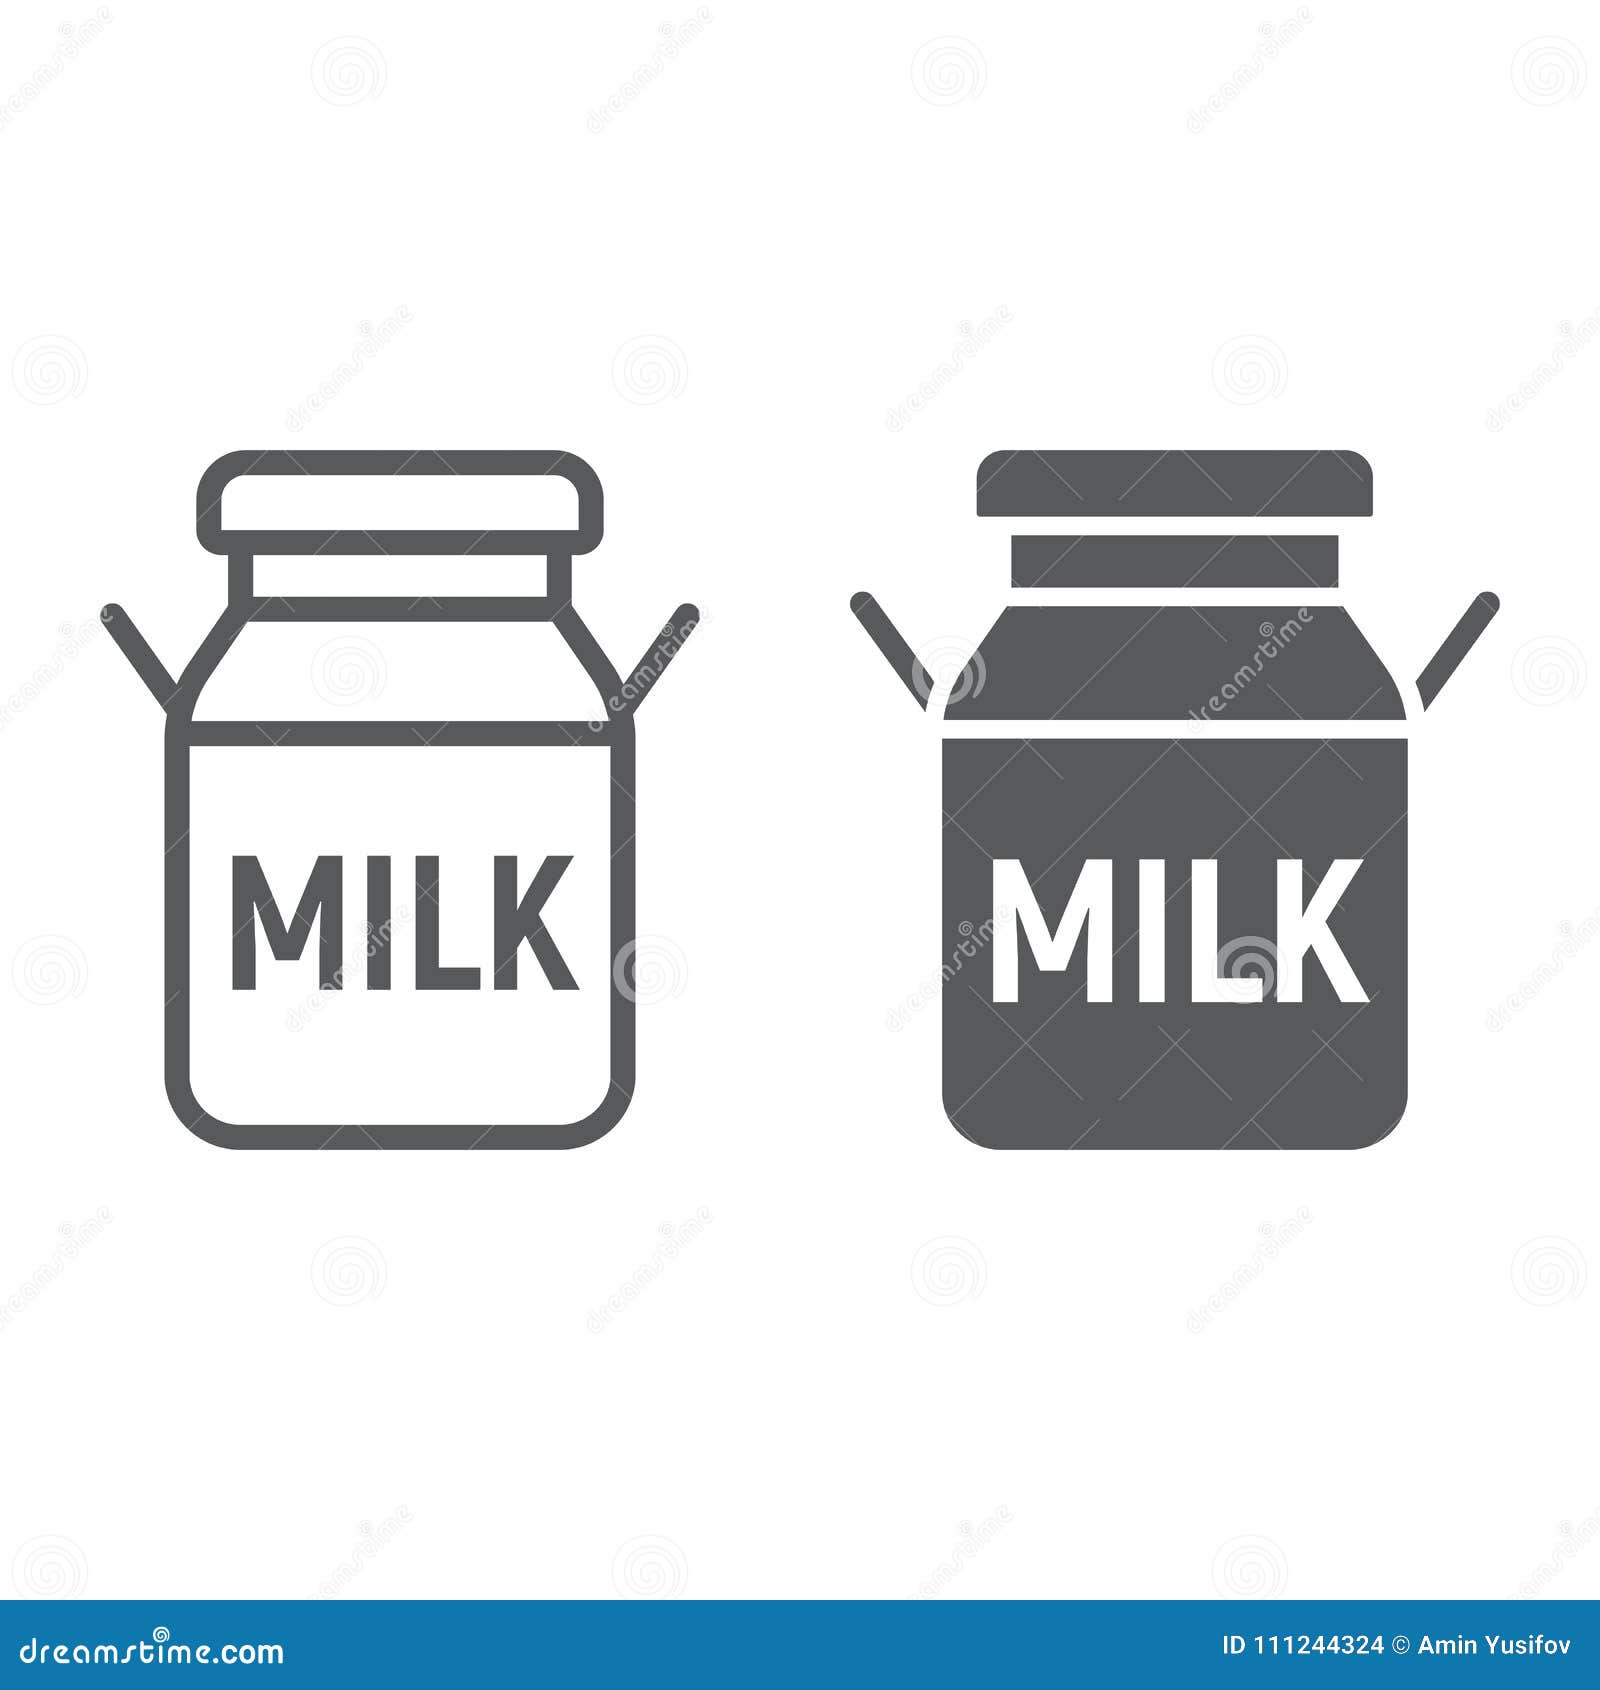 Can containers for milk Royalty Free Vector Image